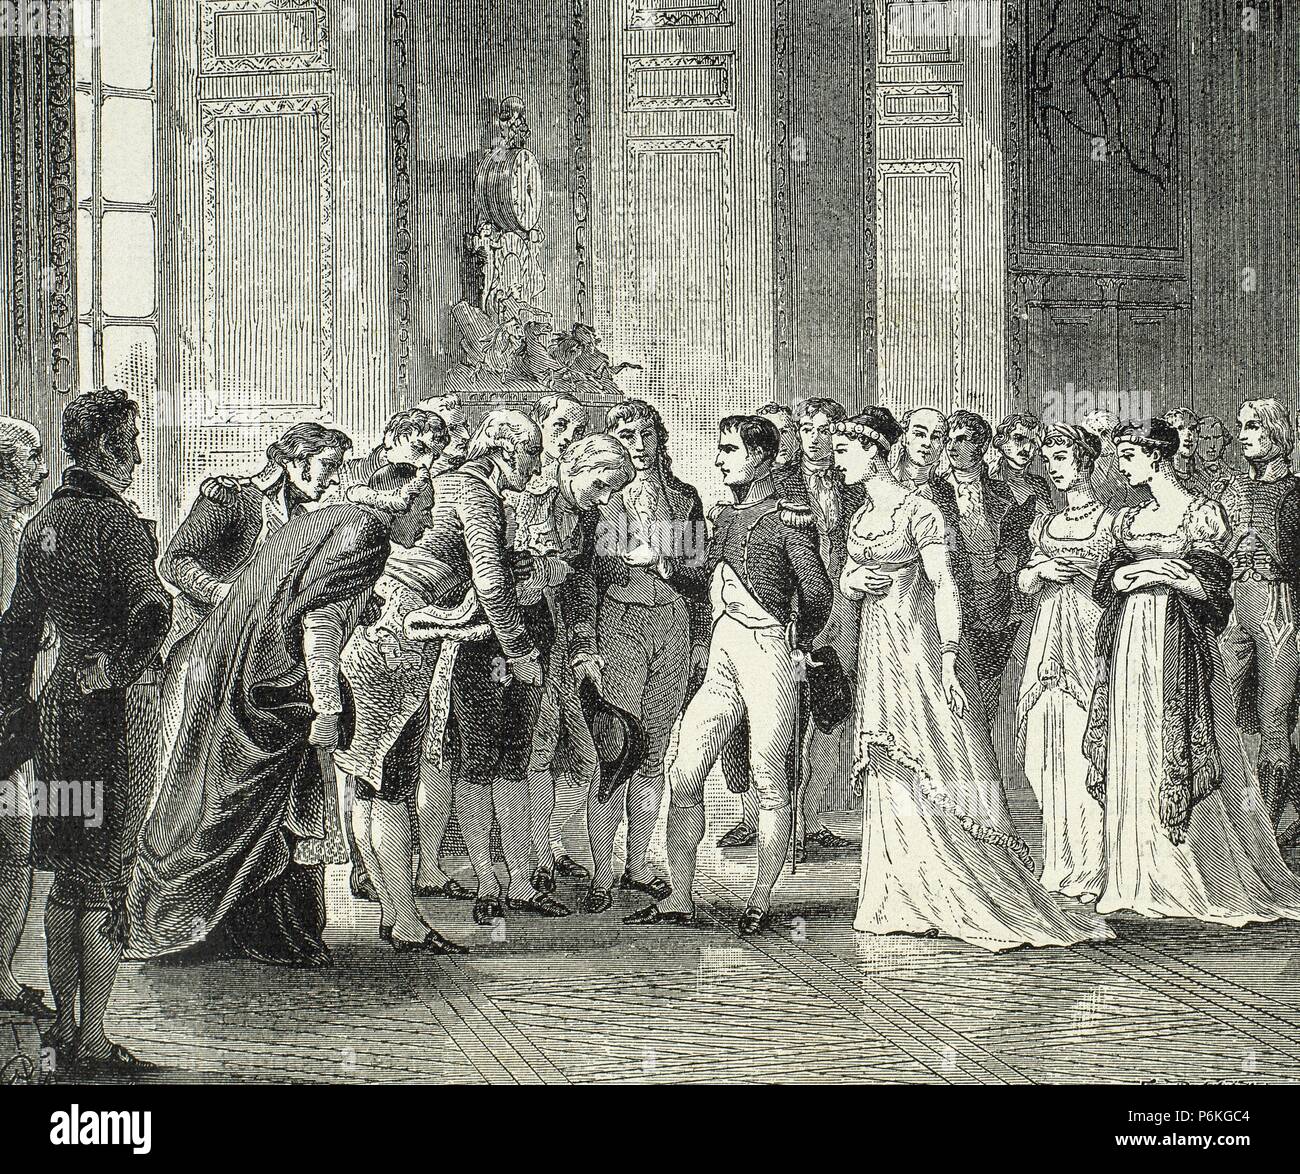 Napoleon Bonaparte (1769-1821).  Emperor of the French from 1804-1814. Engraving by Longhi, 1812. Reception at the Saint-Cloud Palace. Engraving by E. Deschamps, 1903. Stock Photo